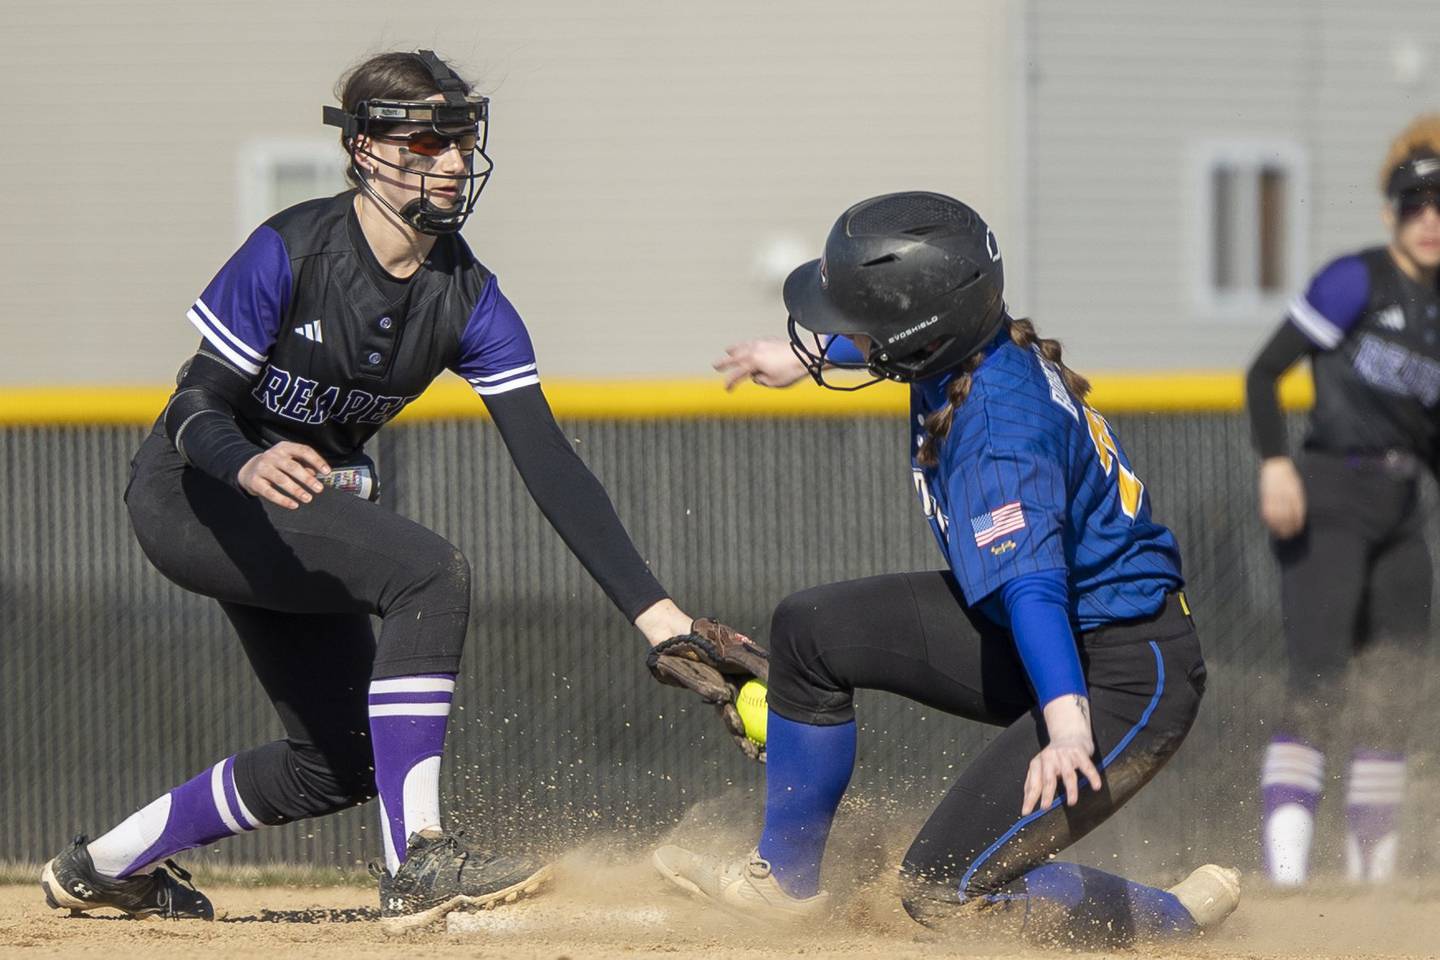 Plano's second baseman Taylor Downs applies the tag on a Somonauk baserunner during Monday's game in Plano.